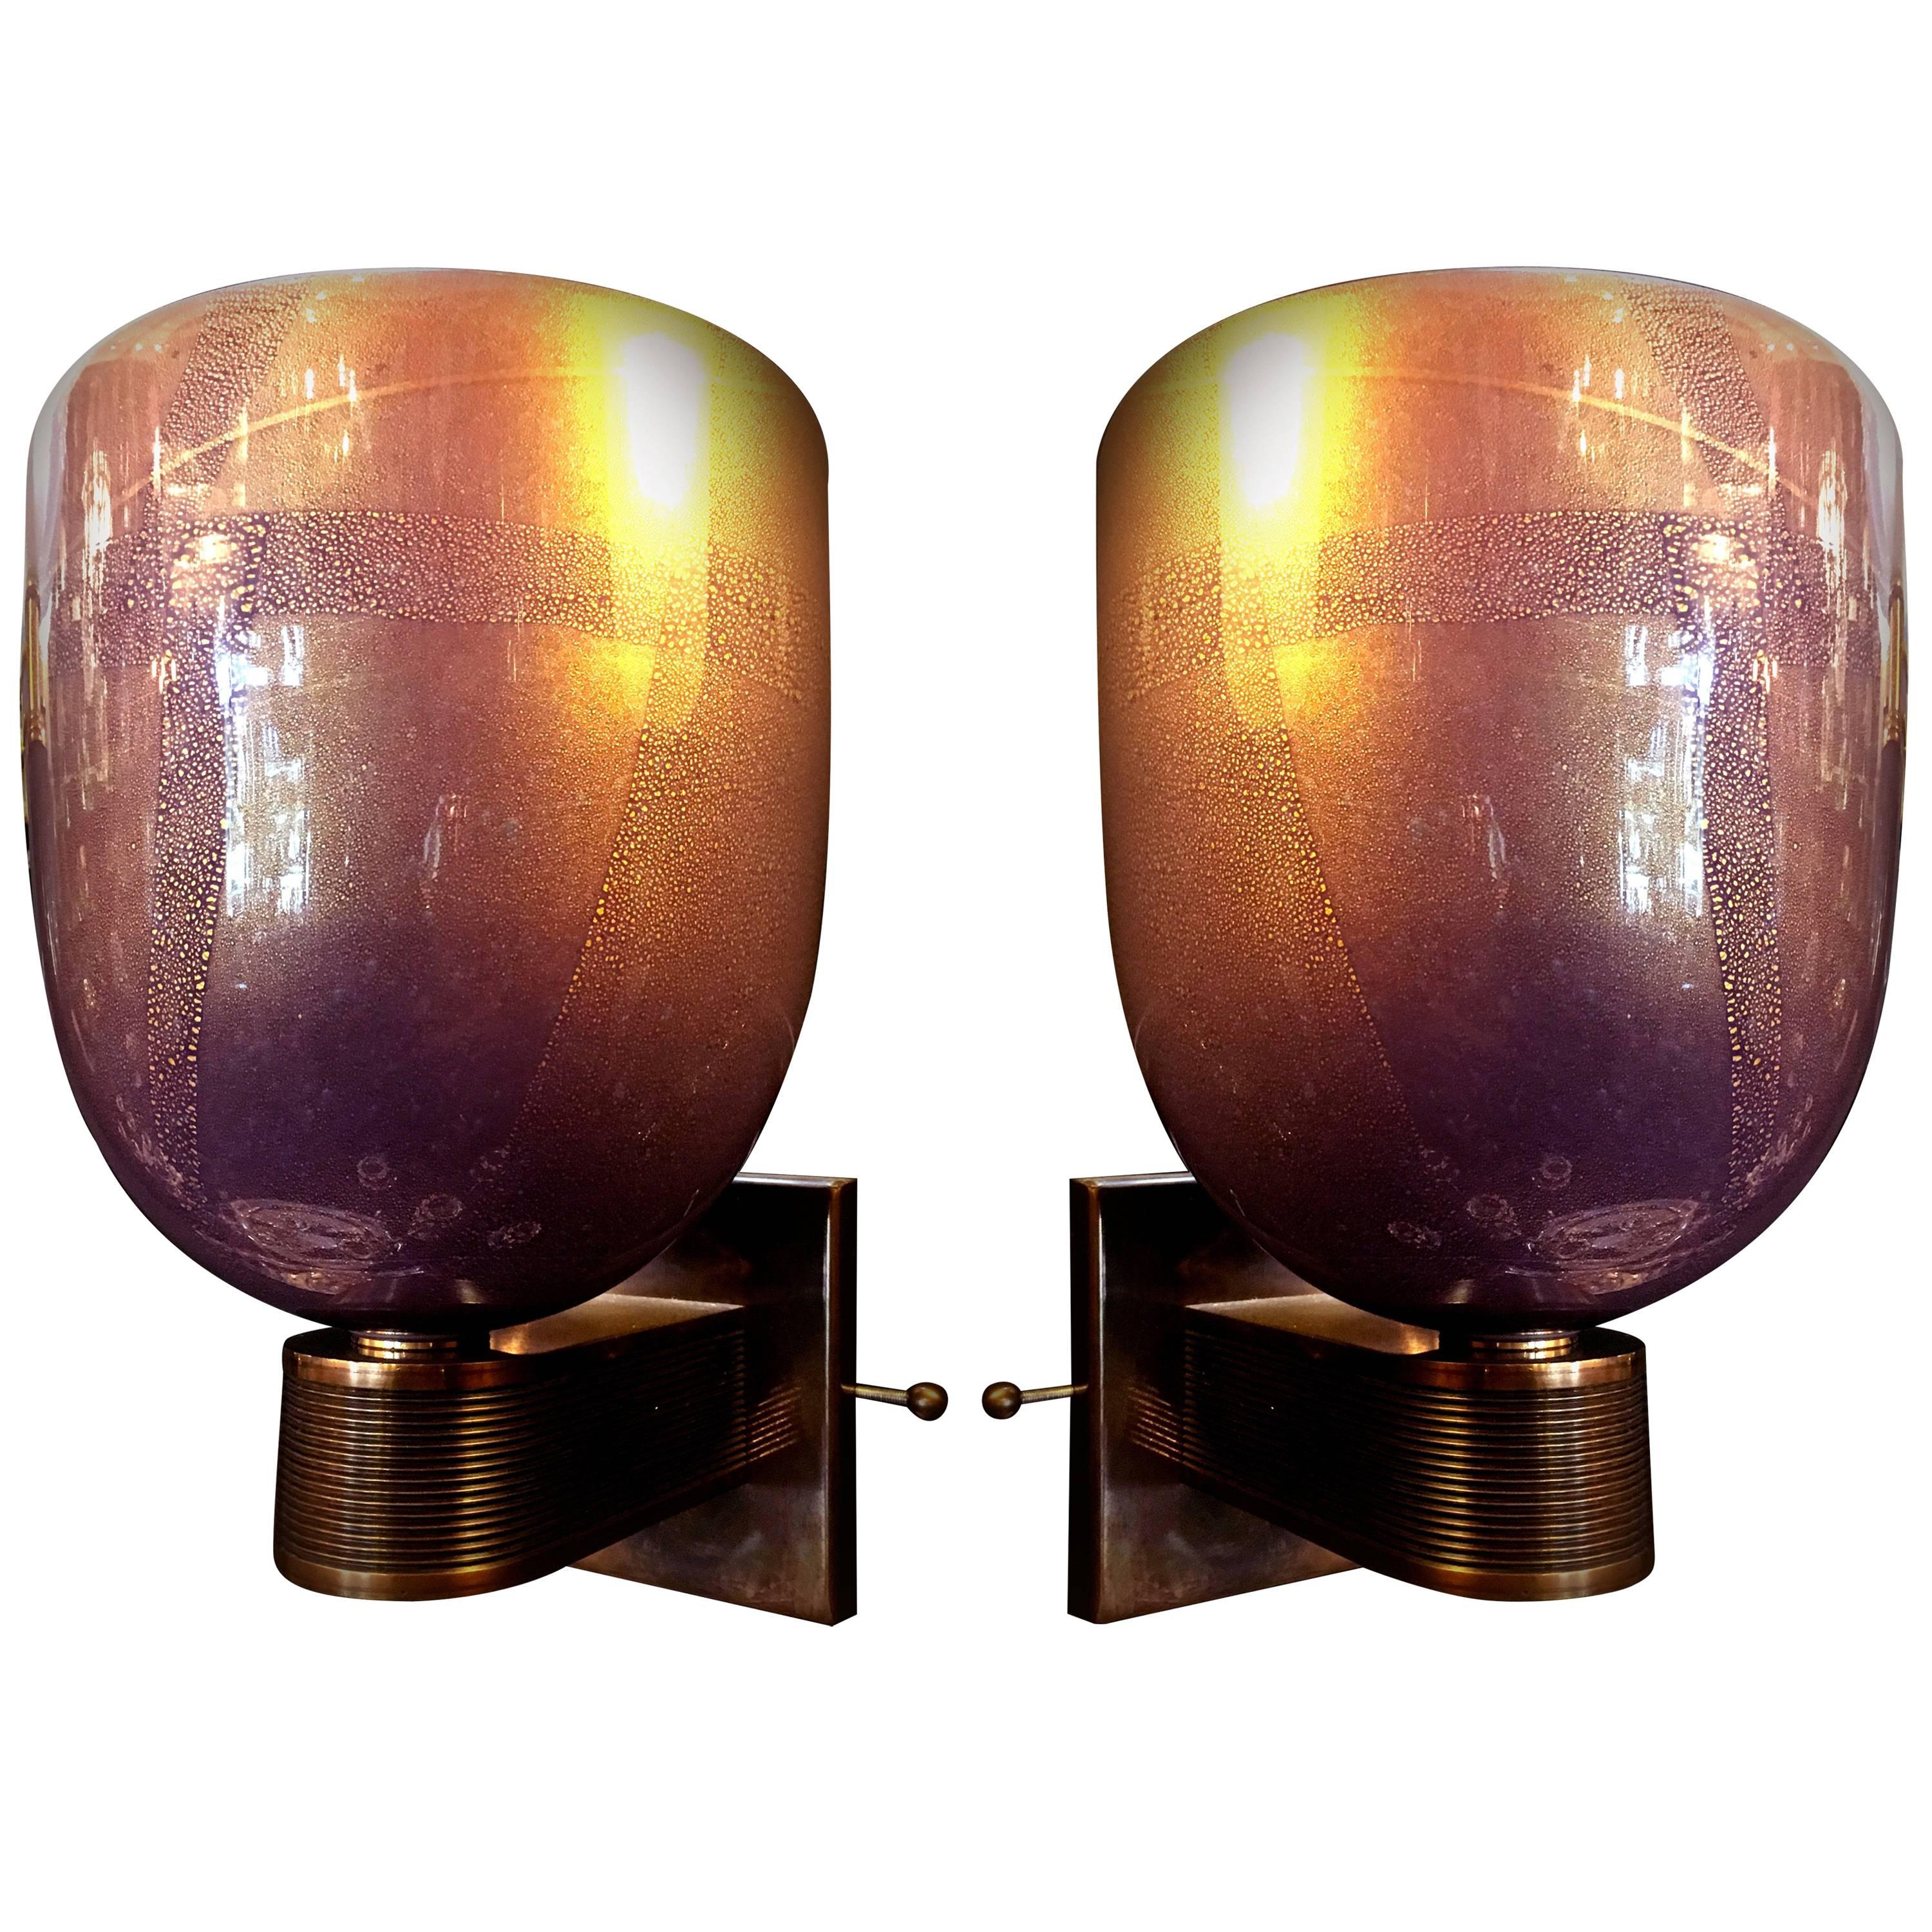 Pair of Sconces by Barovier & Toso, Murano, 1950s For Sale 5